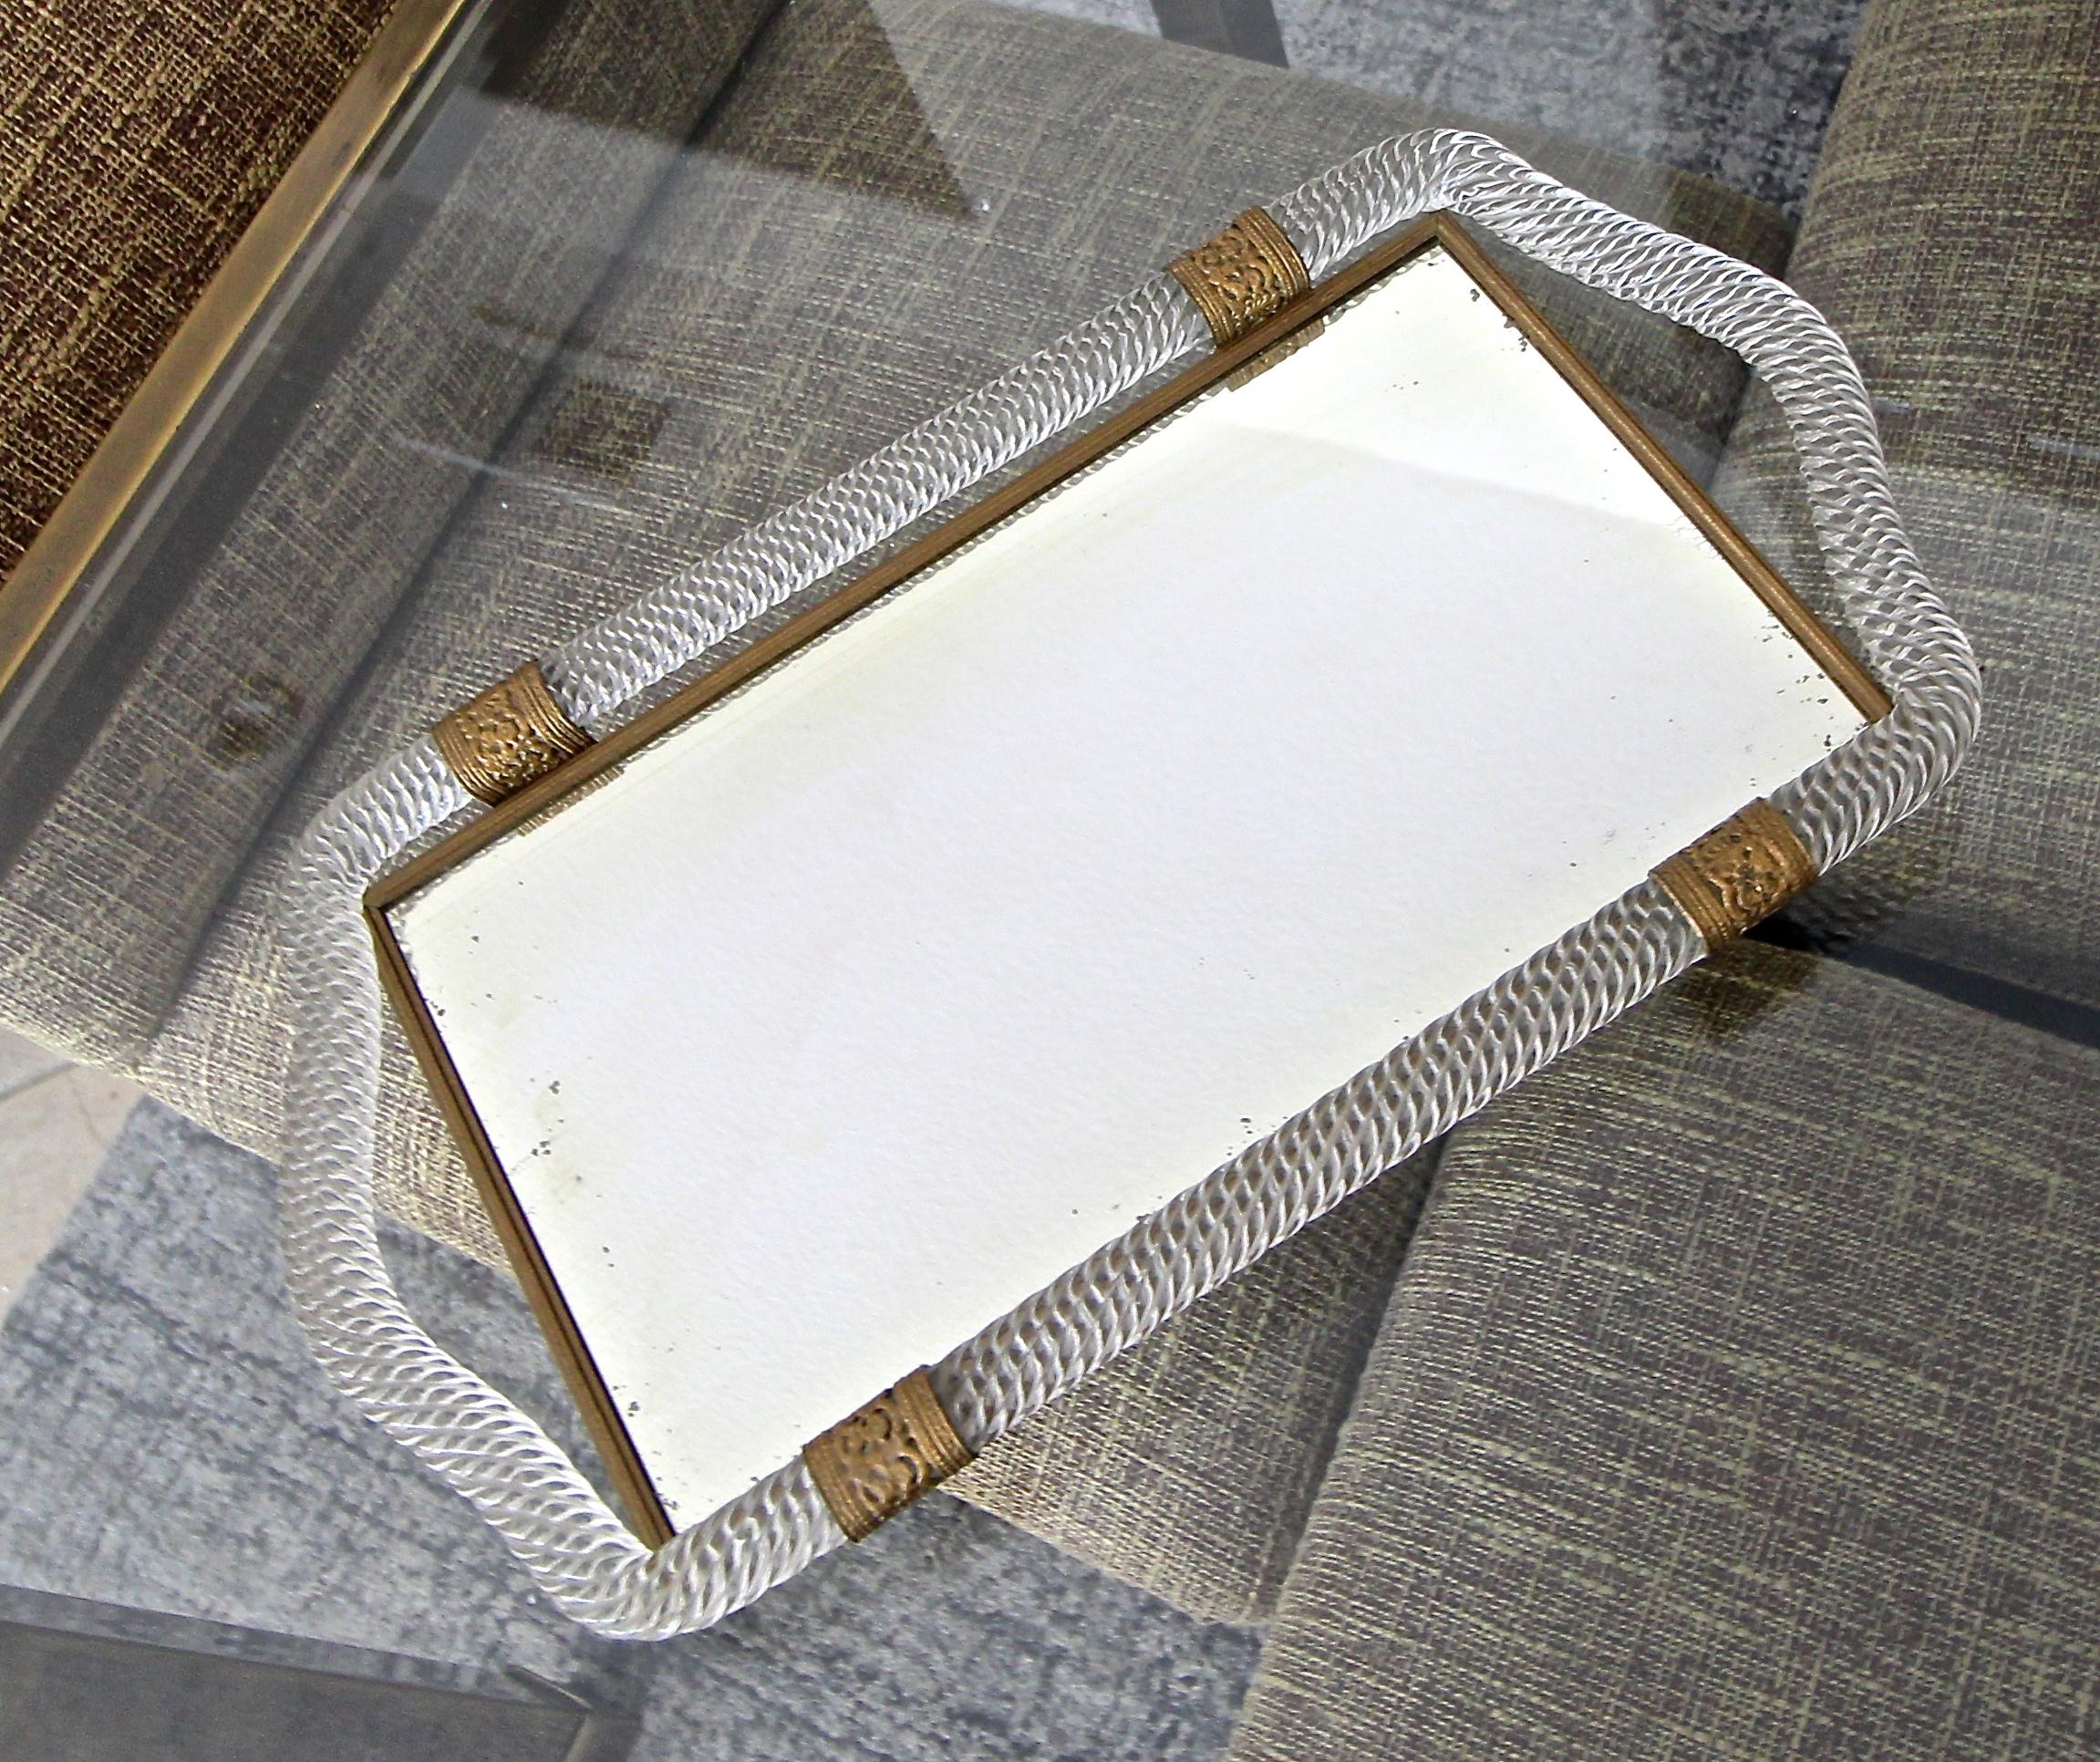 Murano Venetian glass mirrored vanity tray surmounted by twisted blown glass with finely detailed embossed brass straps and edging. Similar tray available under separate lisitng.